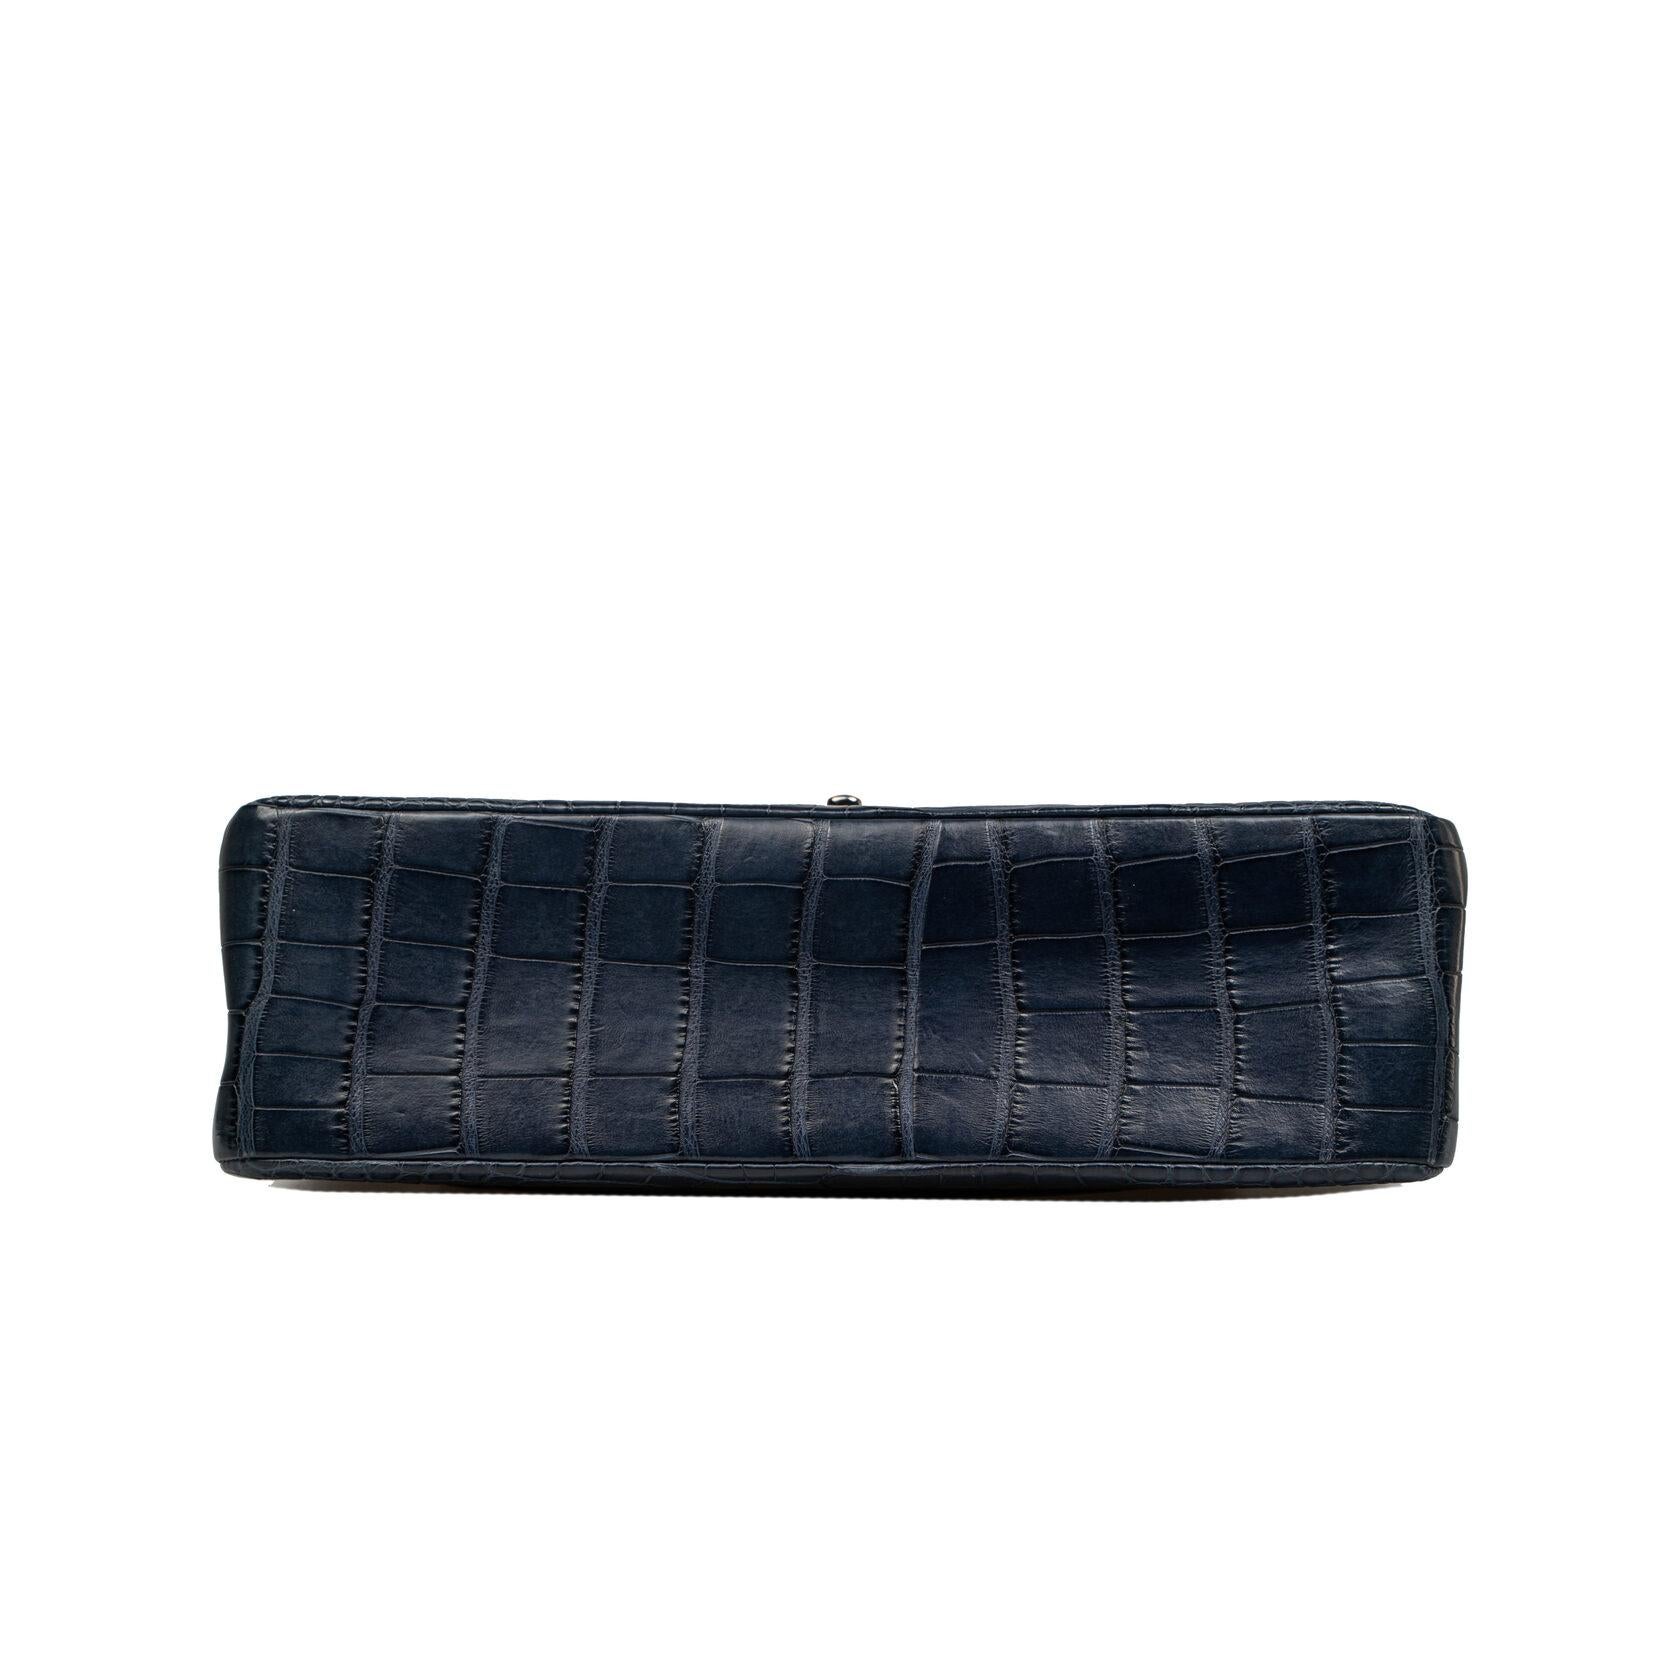 Chanel 11.12 Classic / Timeless Jumbo Double Flap Alligator For Sale 2